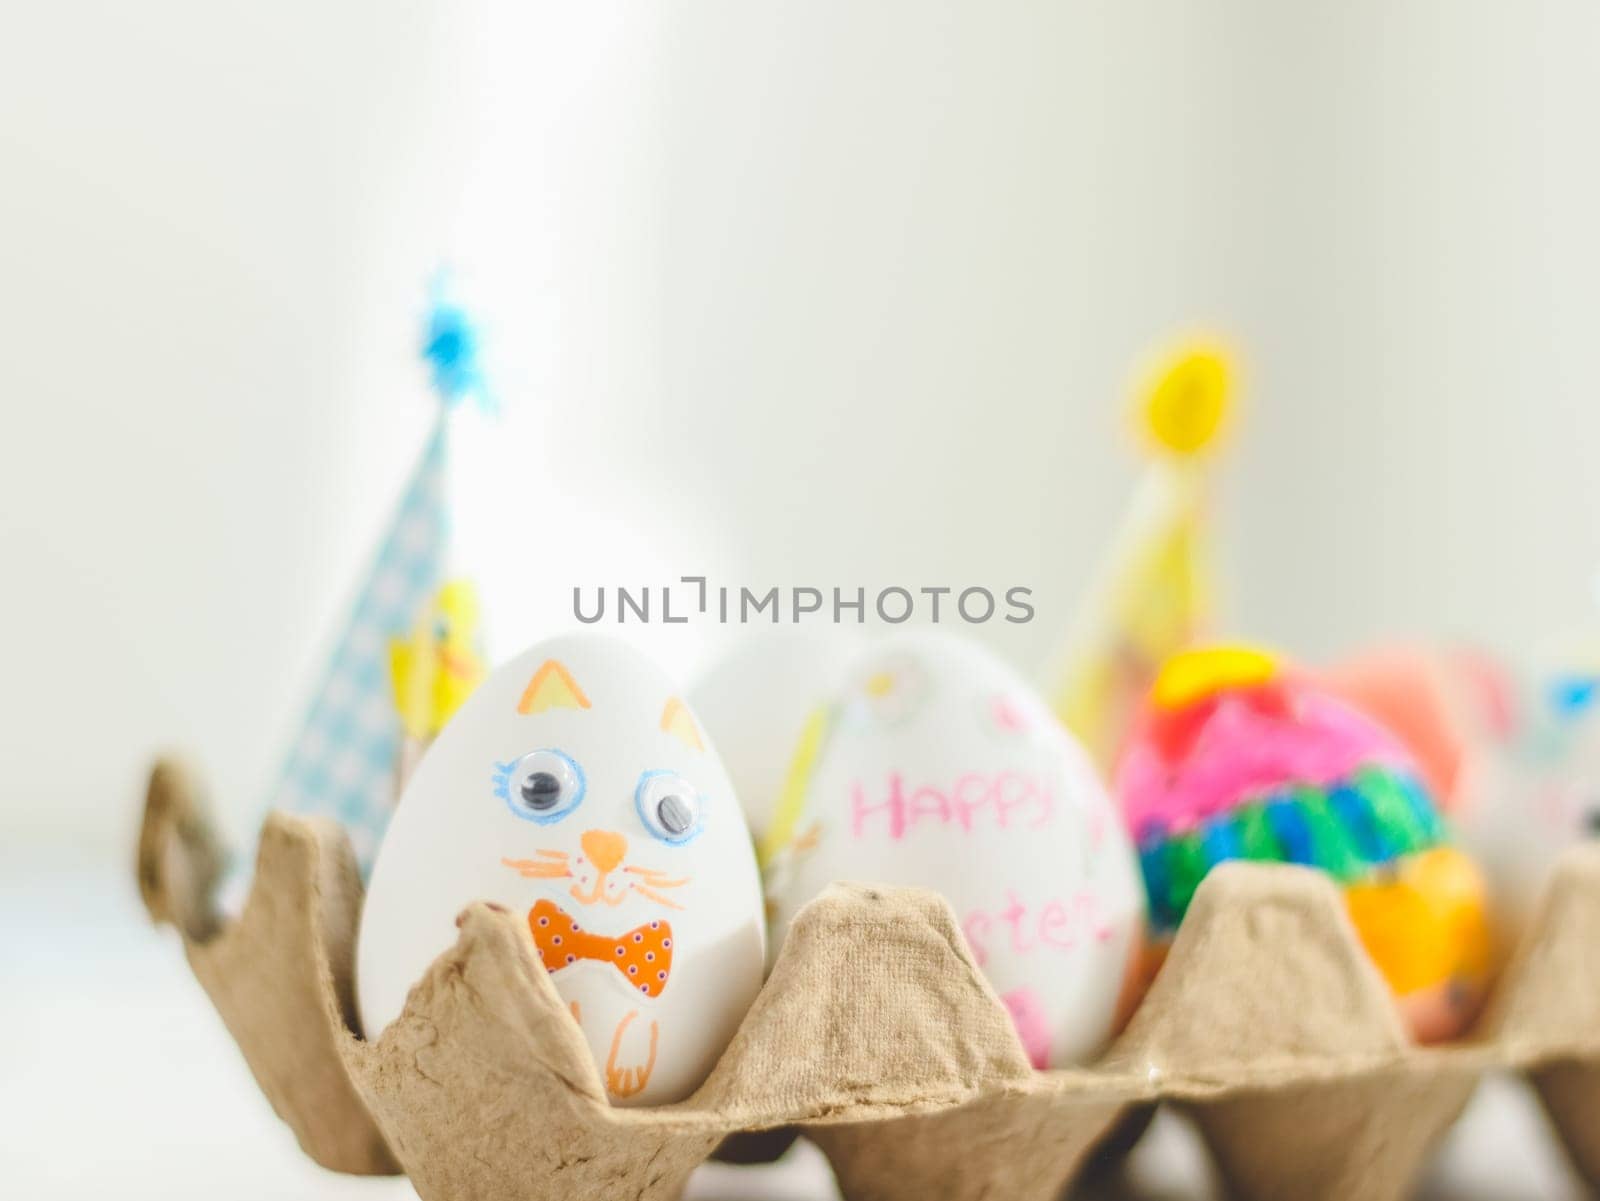 Cardboard package with decorated Easter eggs with glued and painted Easter bunny faces on a marble table with depth of field, side view. The concept of diy, crafts, children art, artisanal, handicraft, diy.